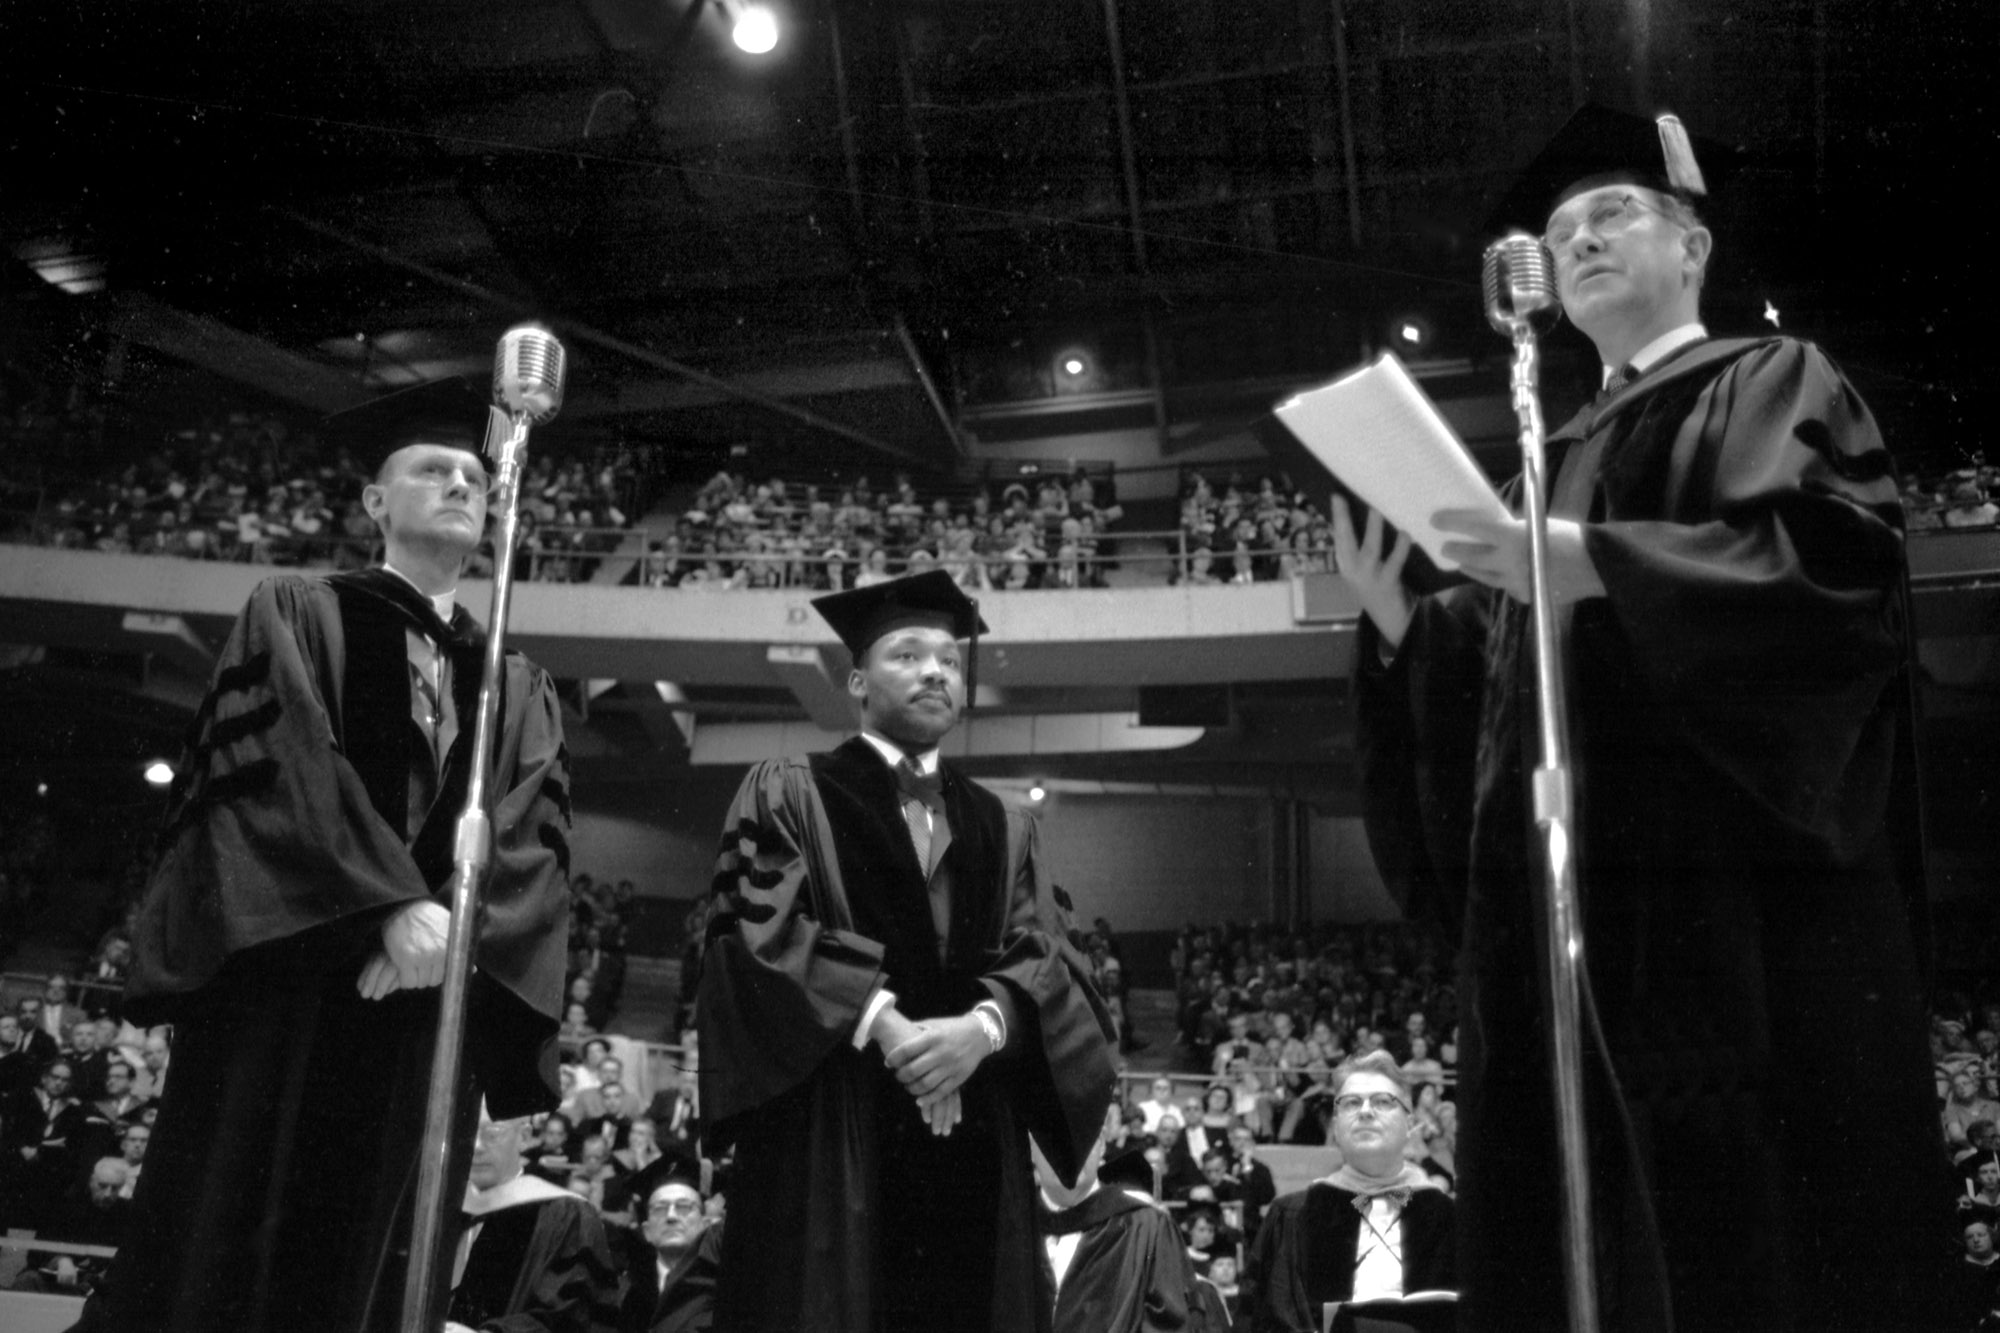 Photo: A black and white photo, a downward angle showing two mics in the foreground. Walter Muelder, Martin Luther King, Jr., and Boston University President Harold Case (left to right) at 1959 Boston University Commencement in Boston Garden. The audience is behind them.